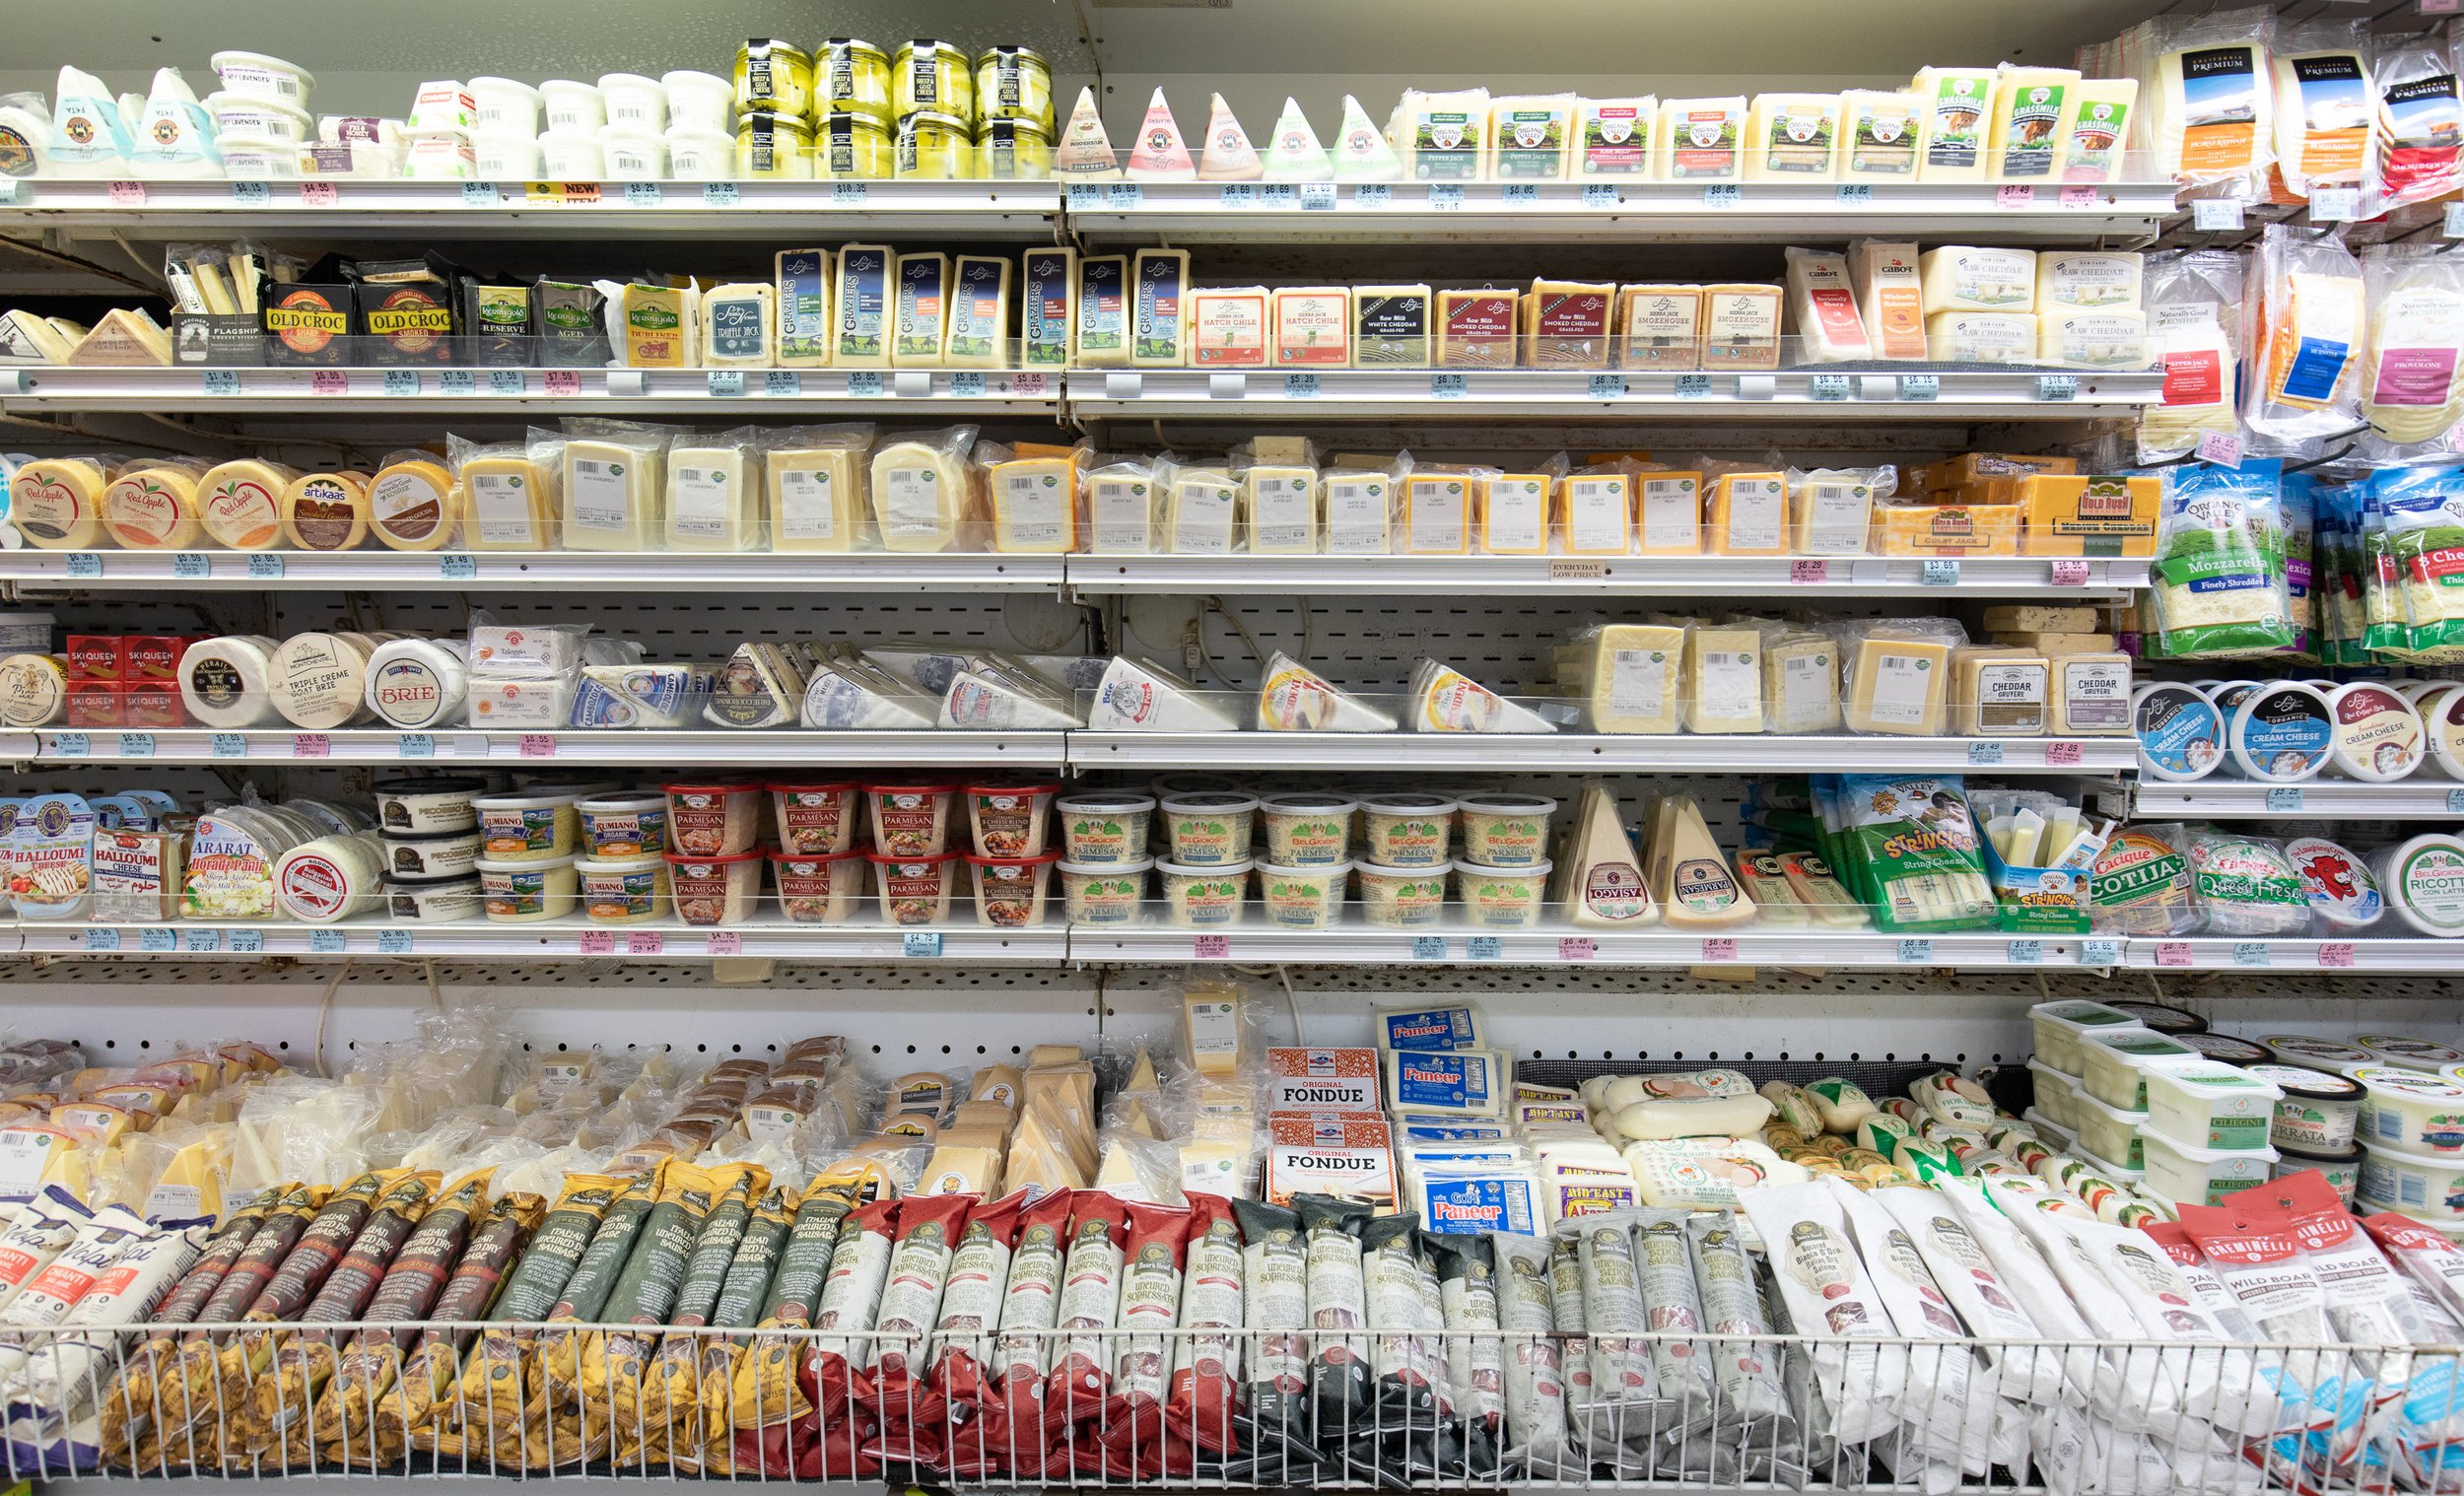 mana-foods-cheese-section.jpg